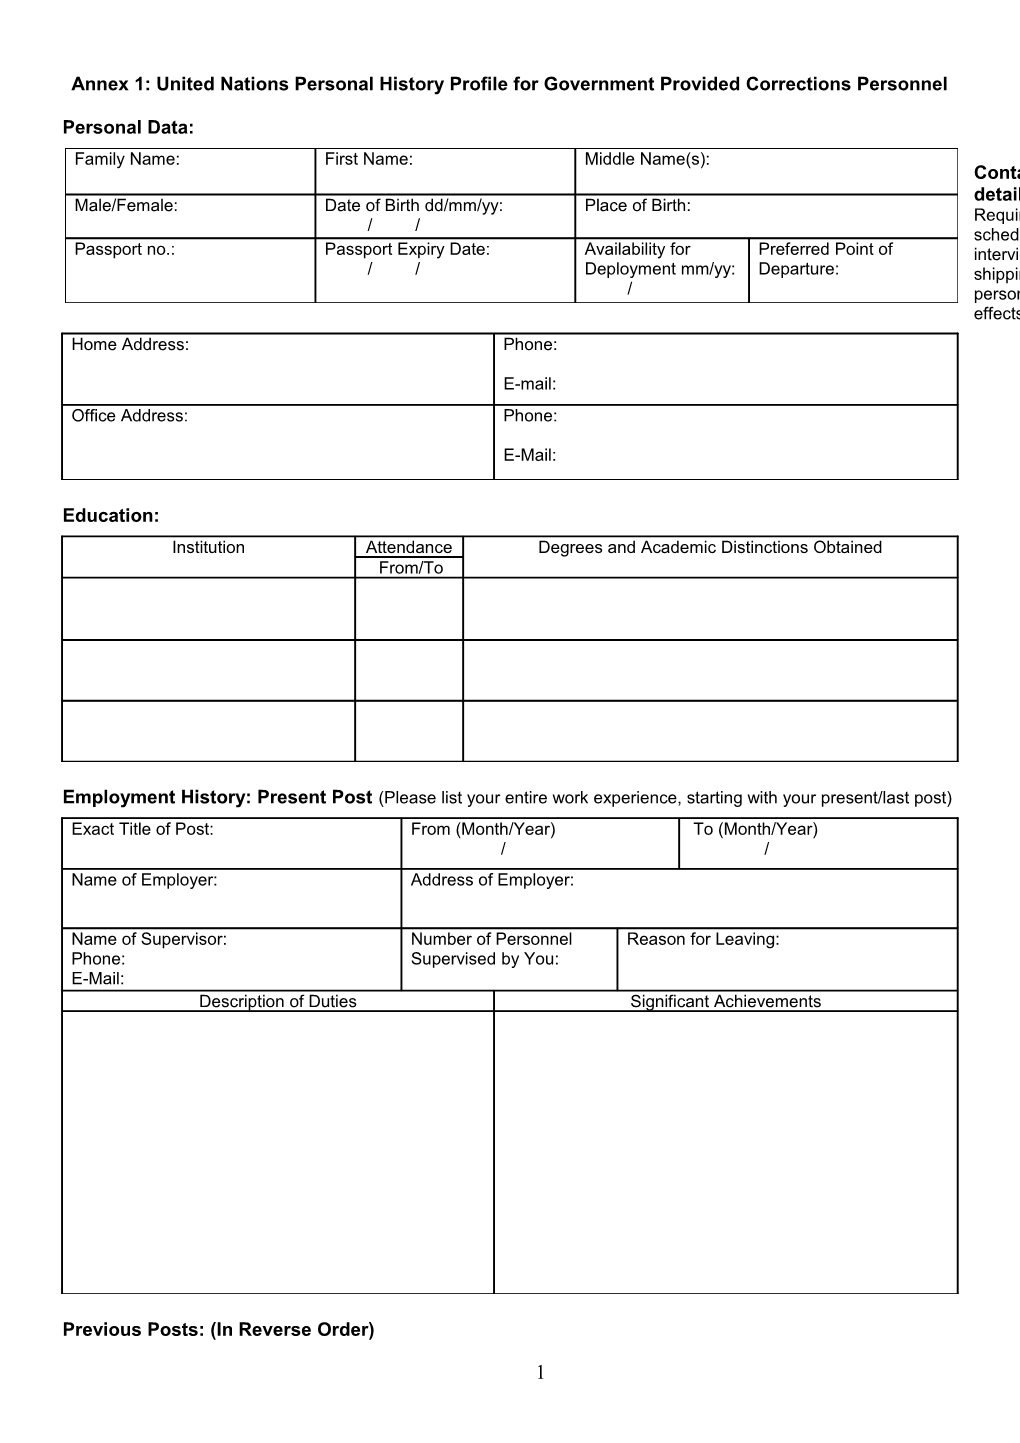 Annex 1: United Nations Personal History Profile for Government Provided Corrections Personnel